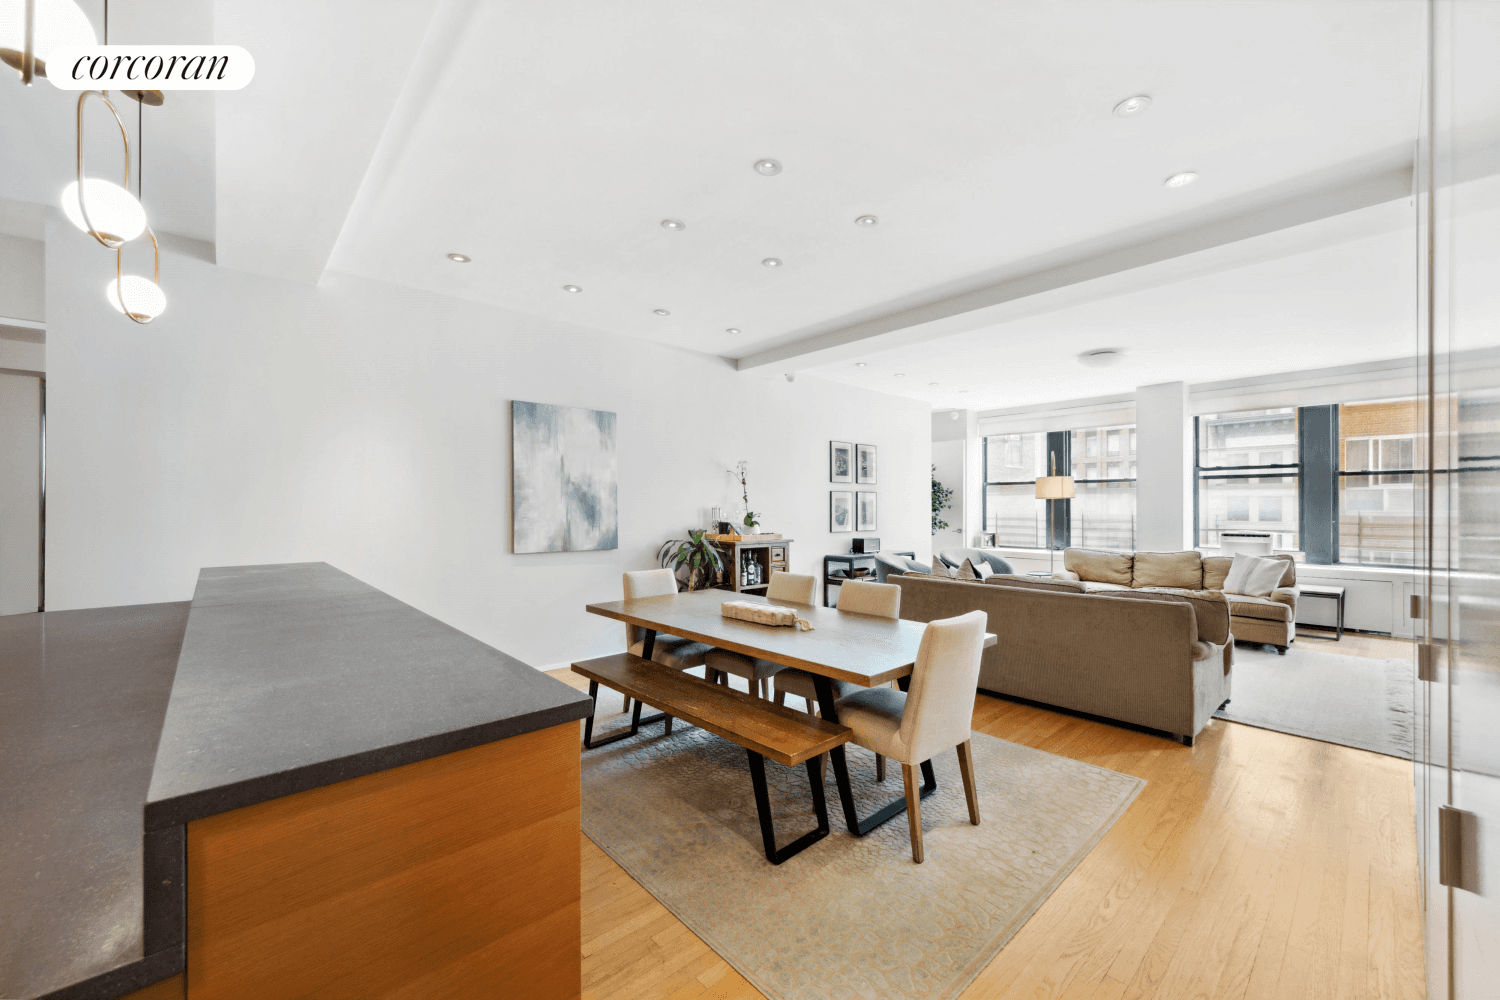 Enjoy an incredible amount of space in this 1800sqft oversized 3 bed, 3 bath loft with high ceilings and a wall of Southern facing windows that make for a brilliantly ...